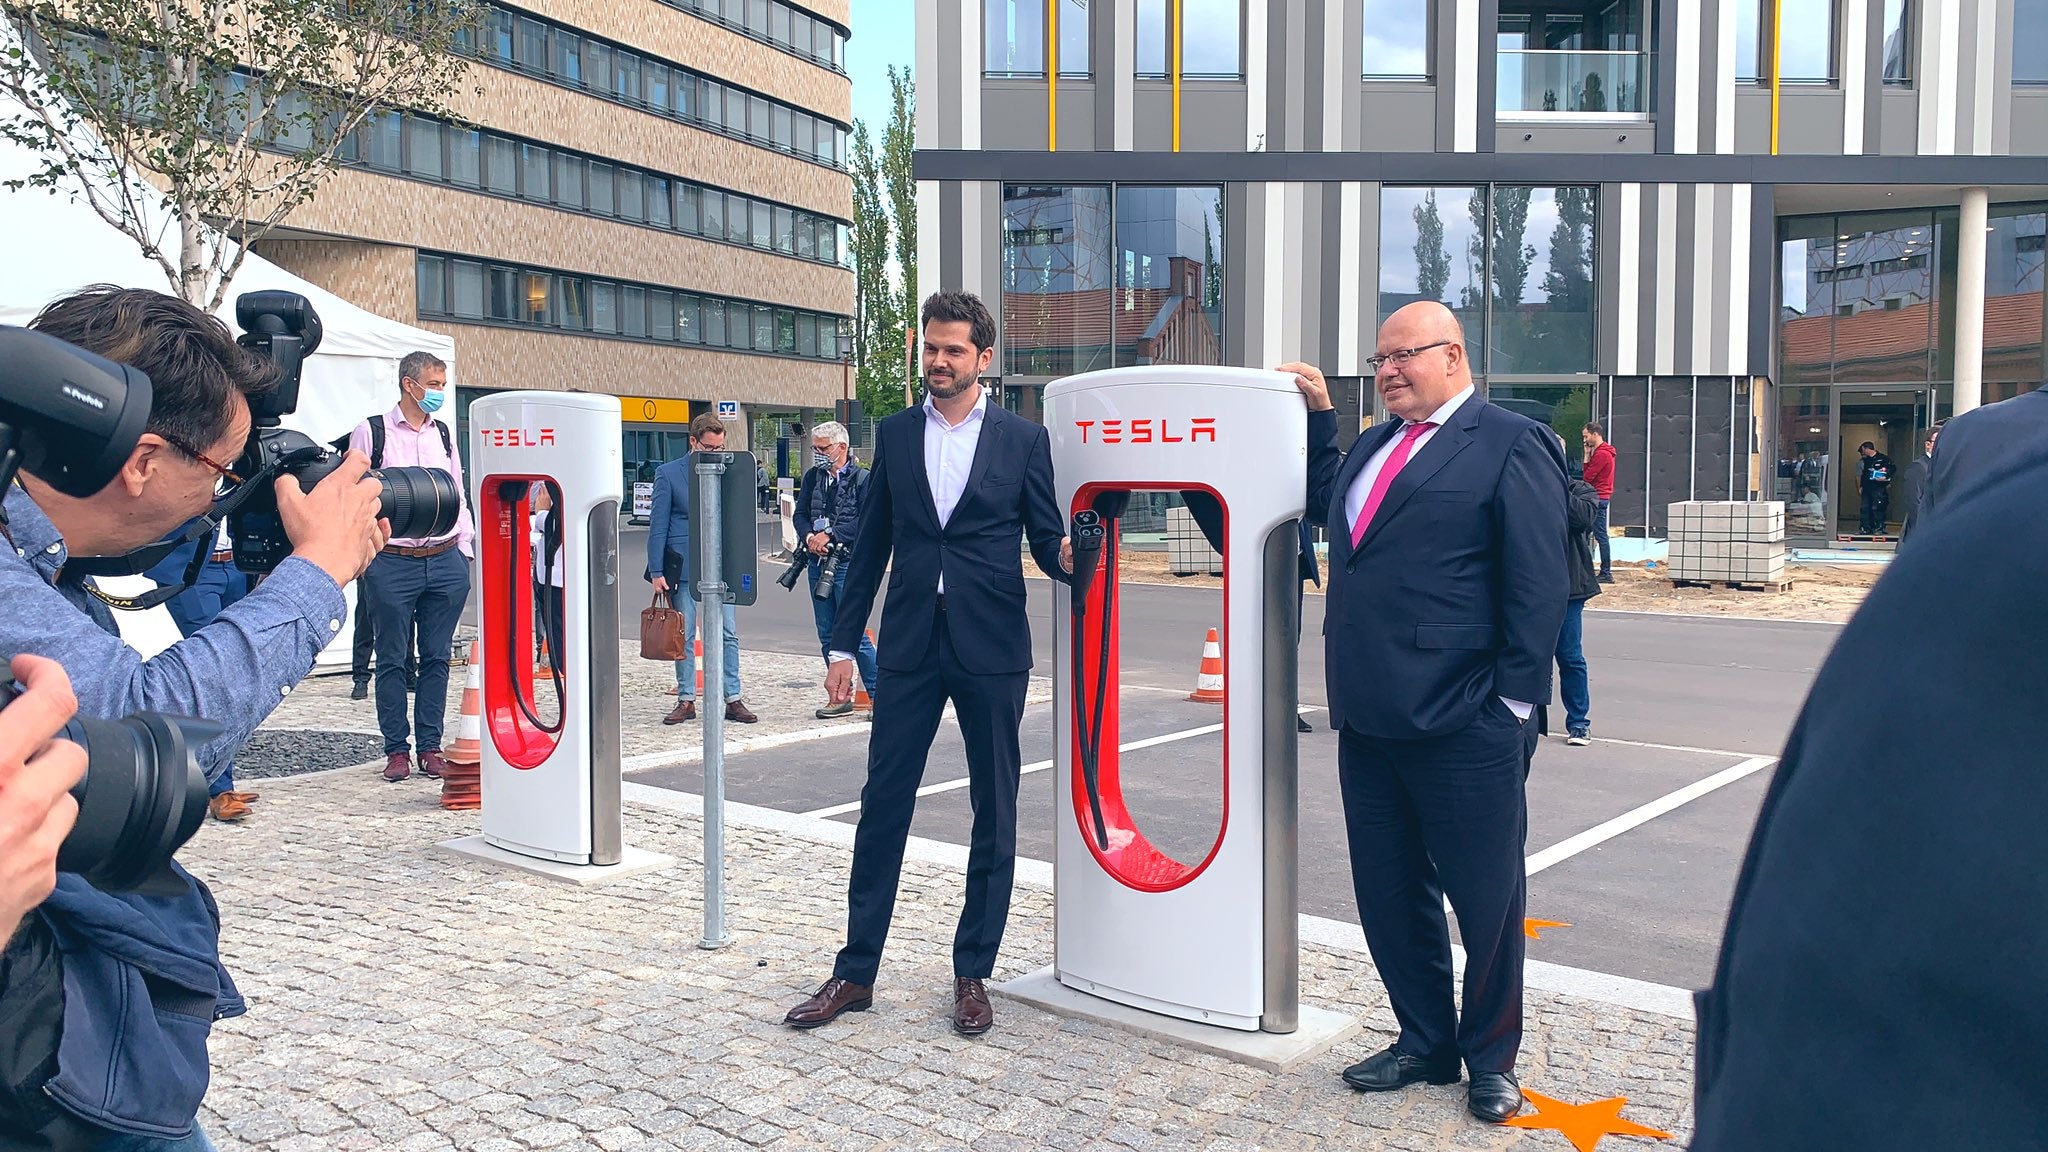 Minister Shows Support for 1st Tesla German V3 Supercharger Opening Event, More Cities Soon